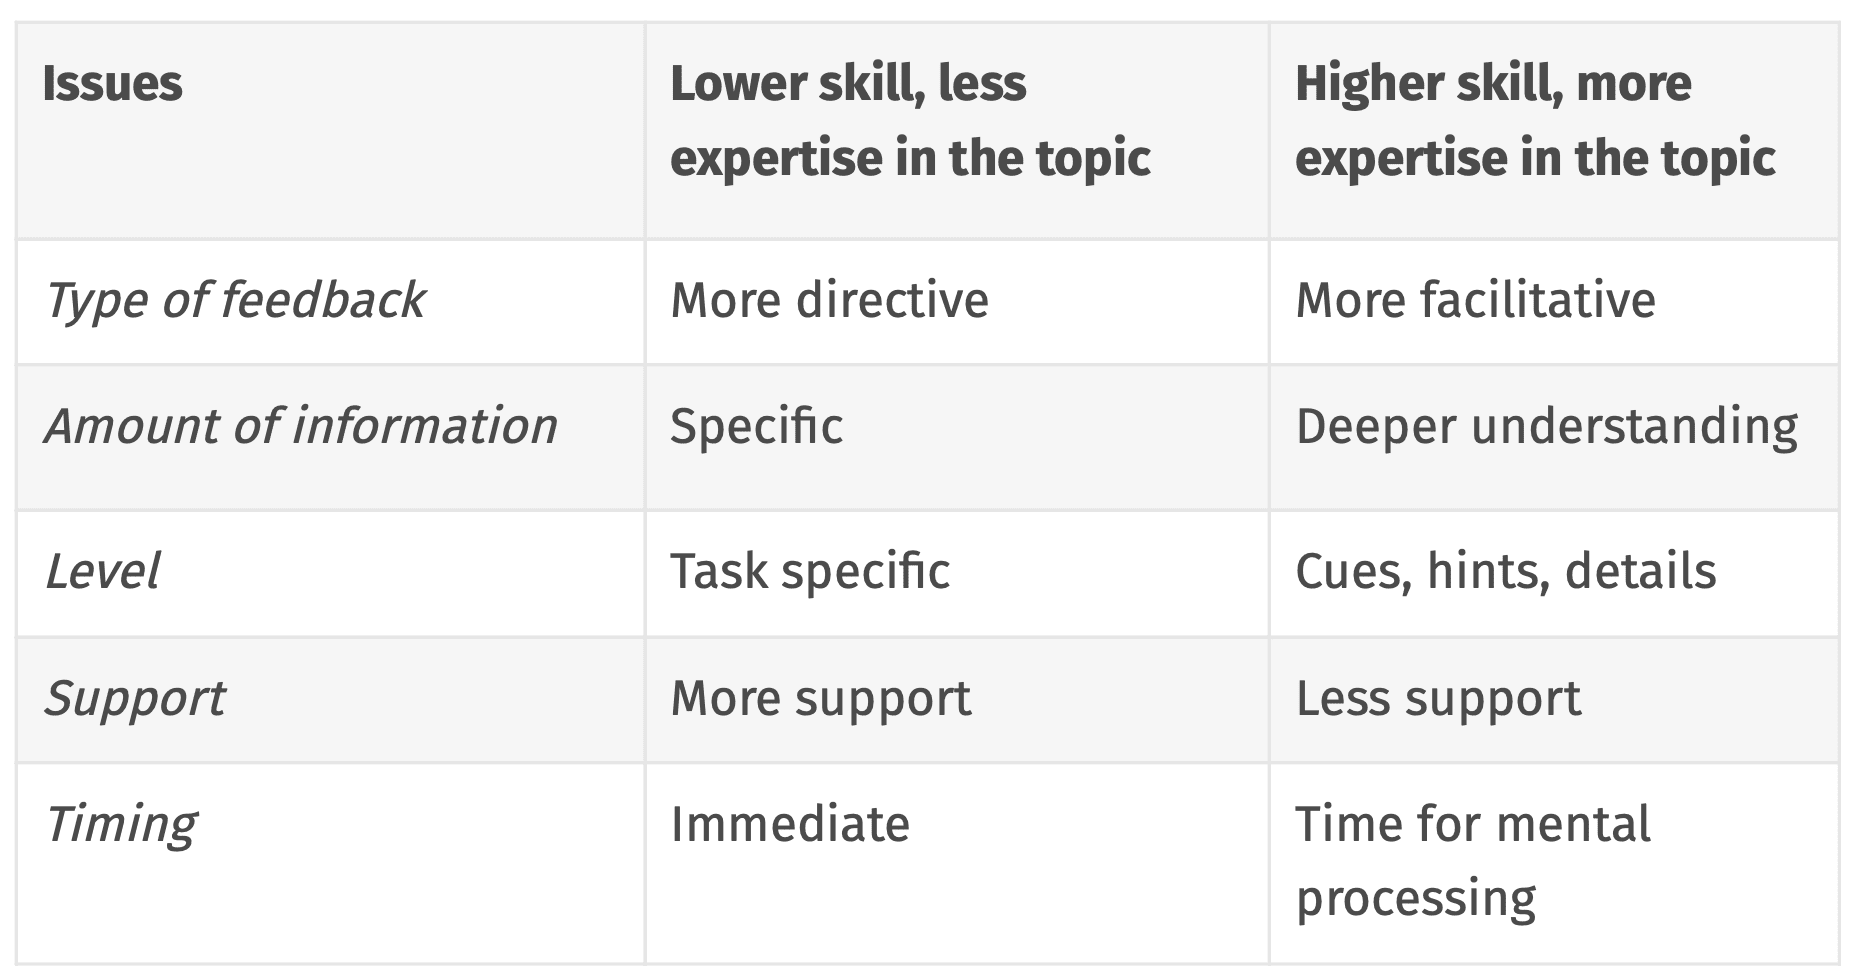 For those less skilled in a topic, feedback that's more directive, specific, supportive, and immediate tends to be helpful. For those with more expertise in a topic, feedback that's more facilitative, that supports deeper understanding, that provides cues and hints, and allows for time for mental process tends to be more helpful.